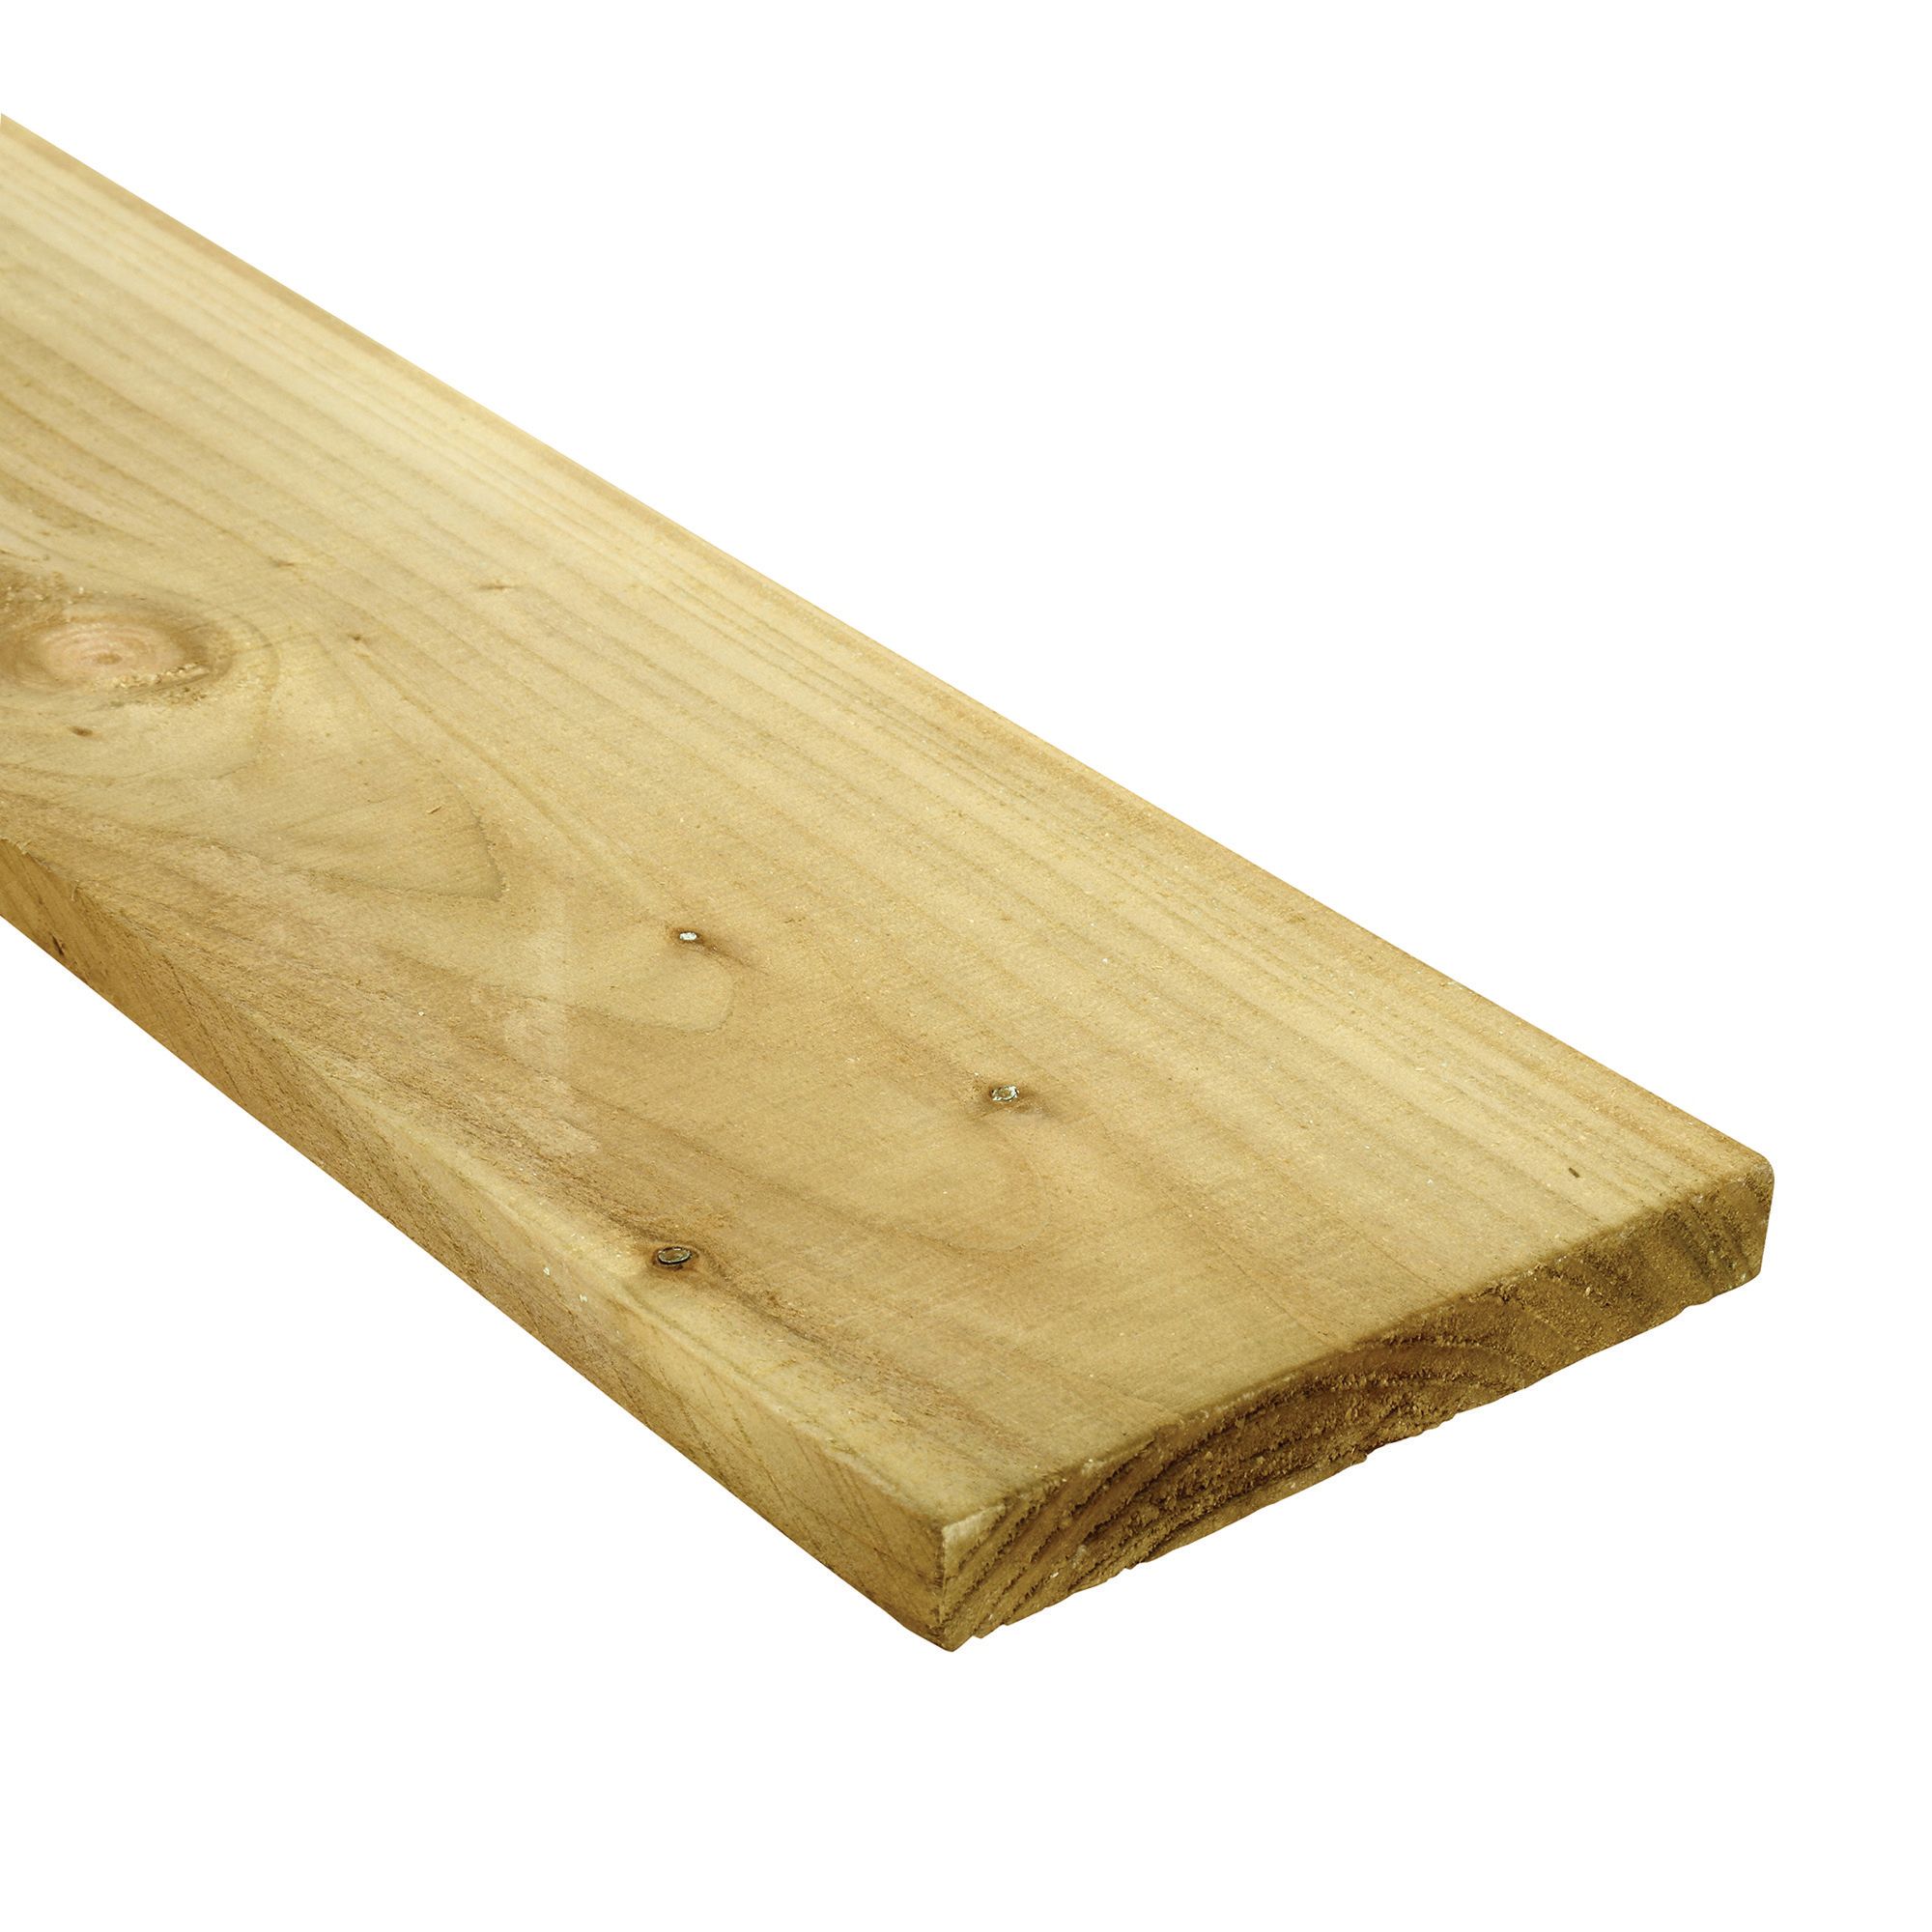 Wickes Treated Timber Gravel Board - 19mm x 150mm x 2.4m